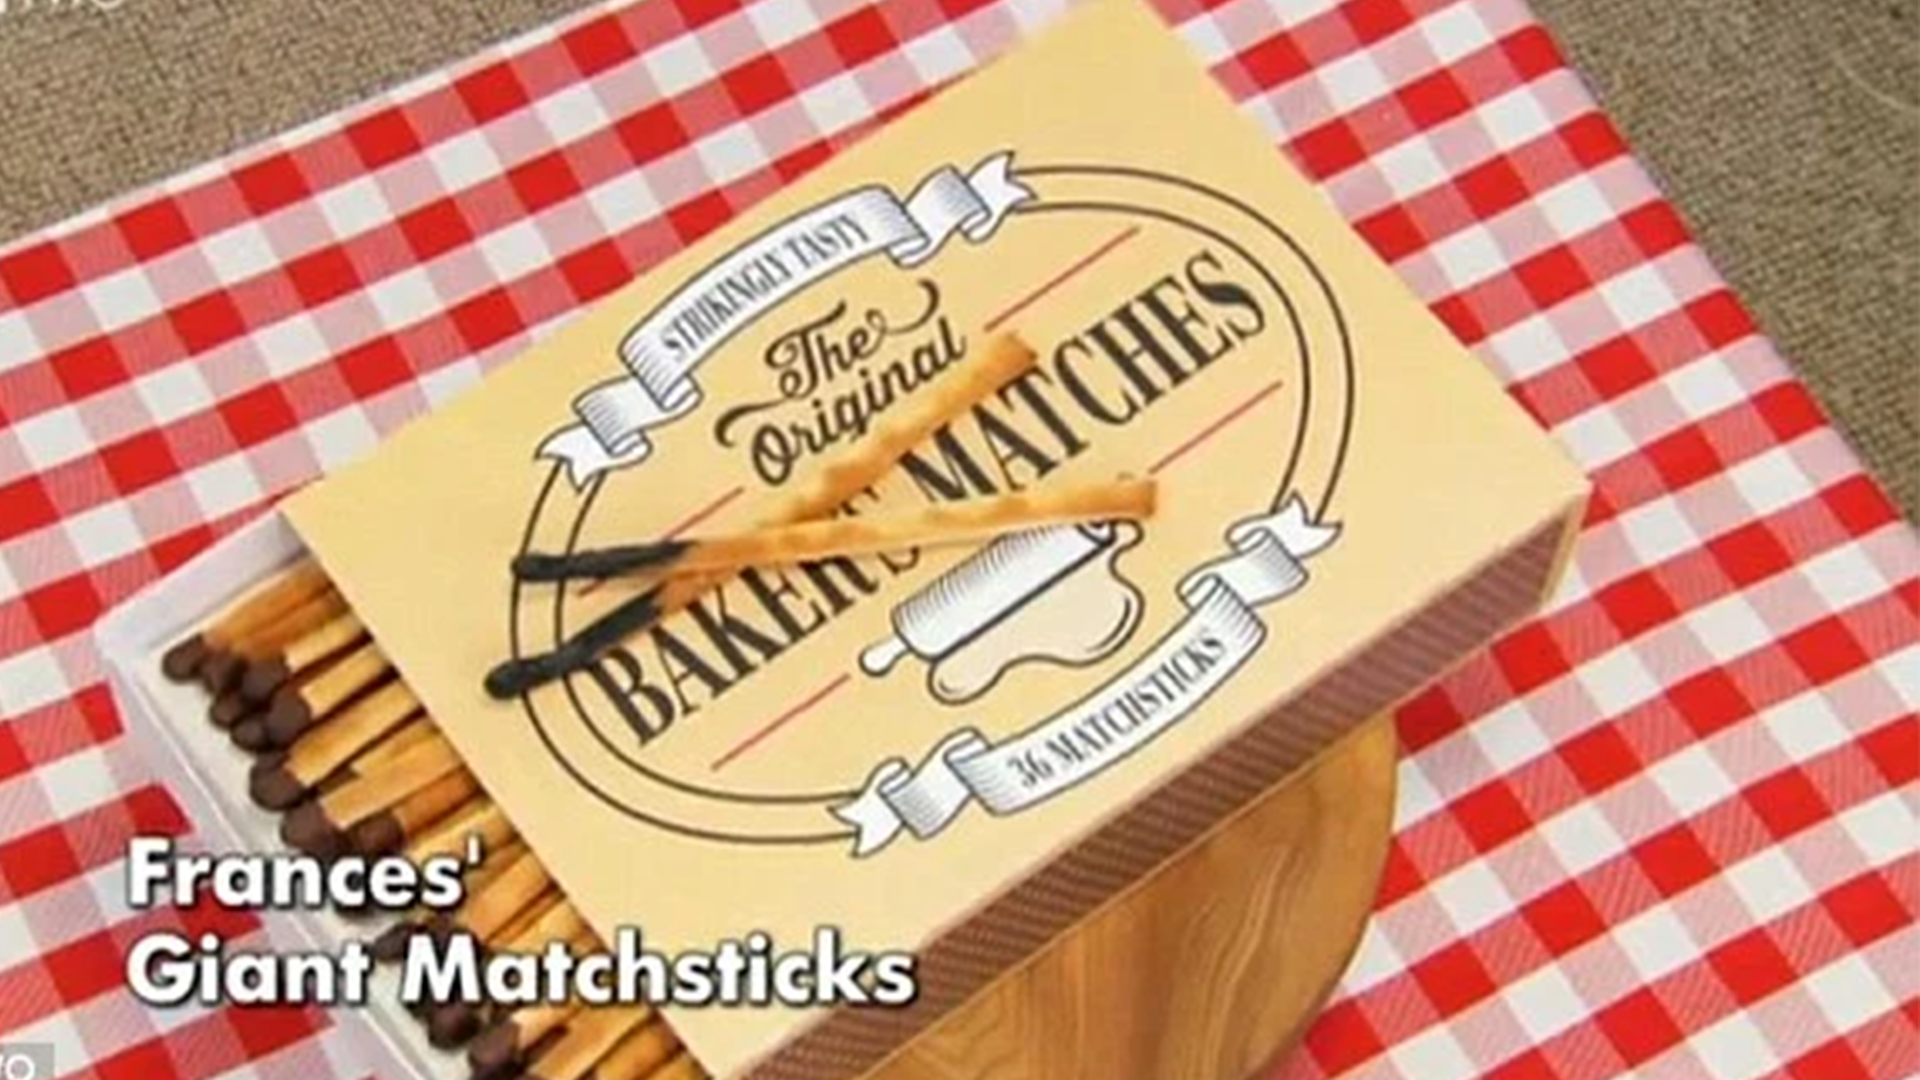 A bake which looks like a box of matchsticks 